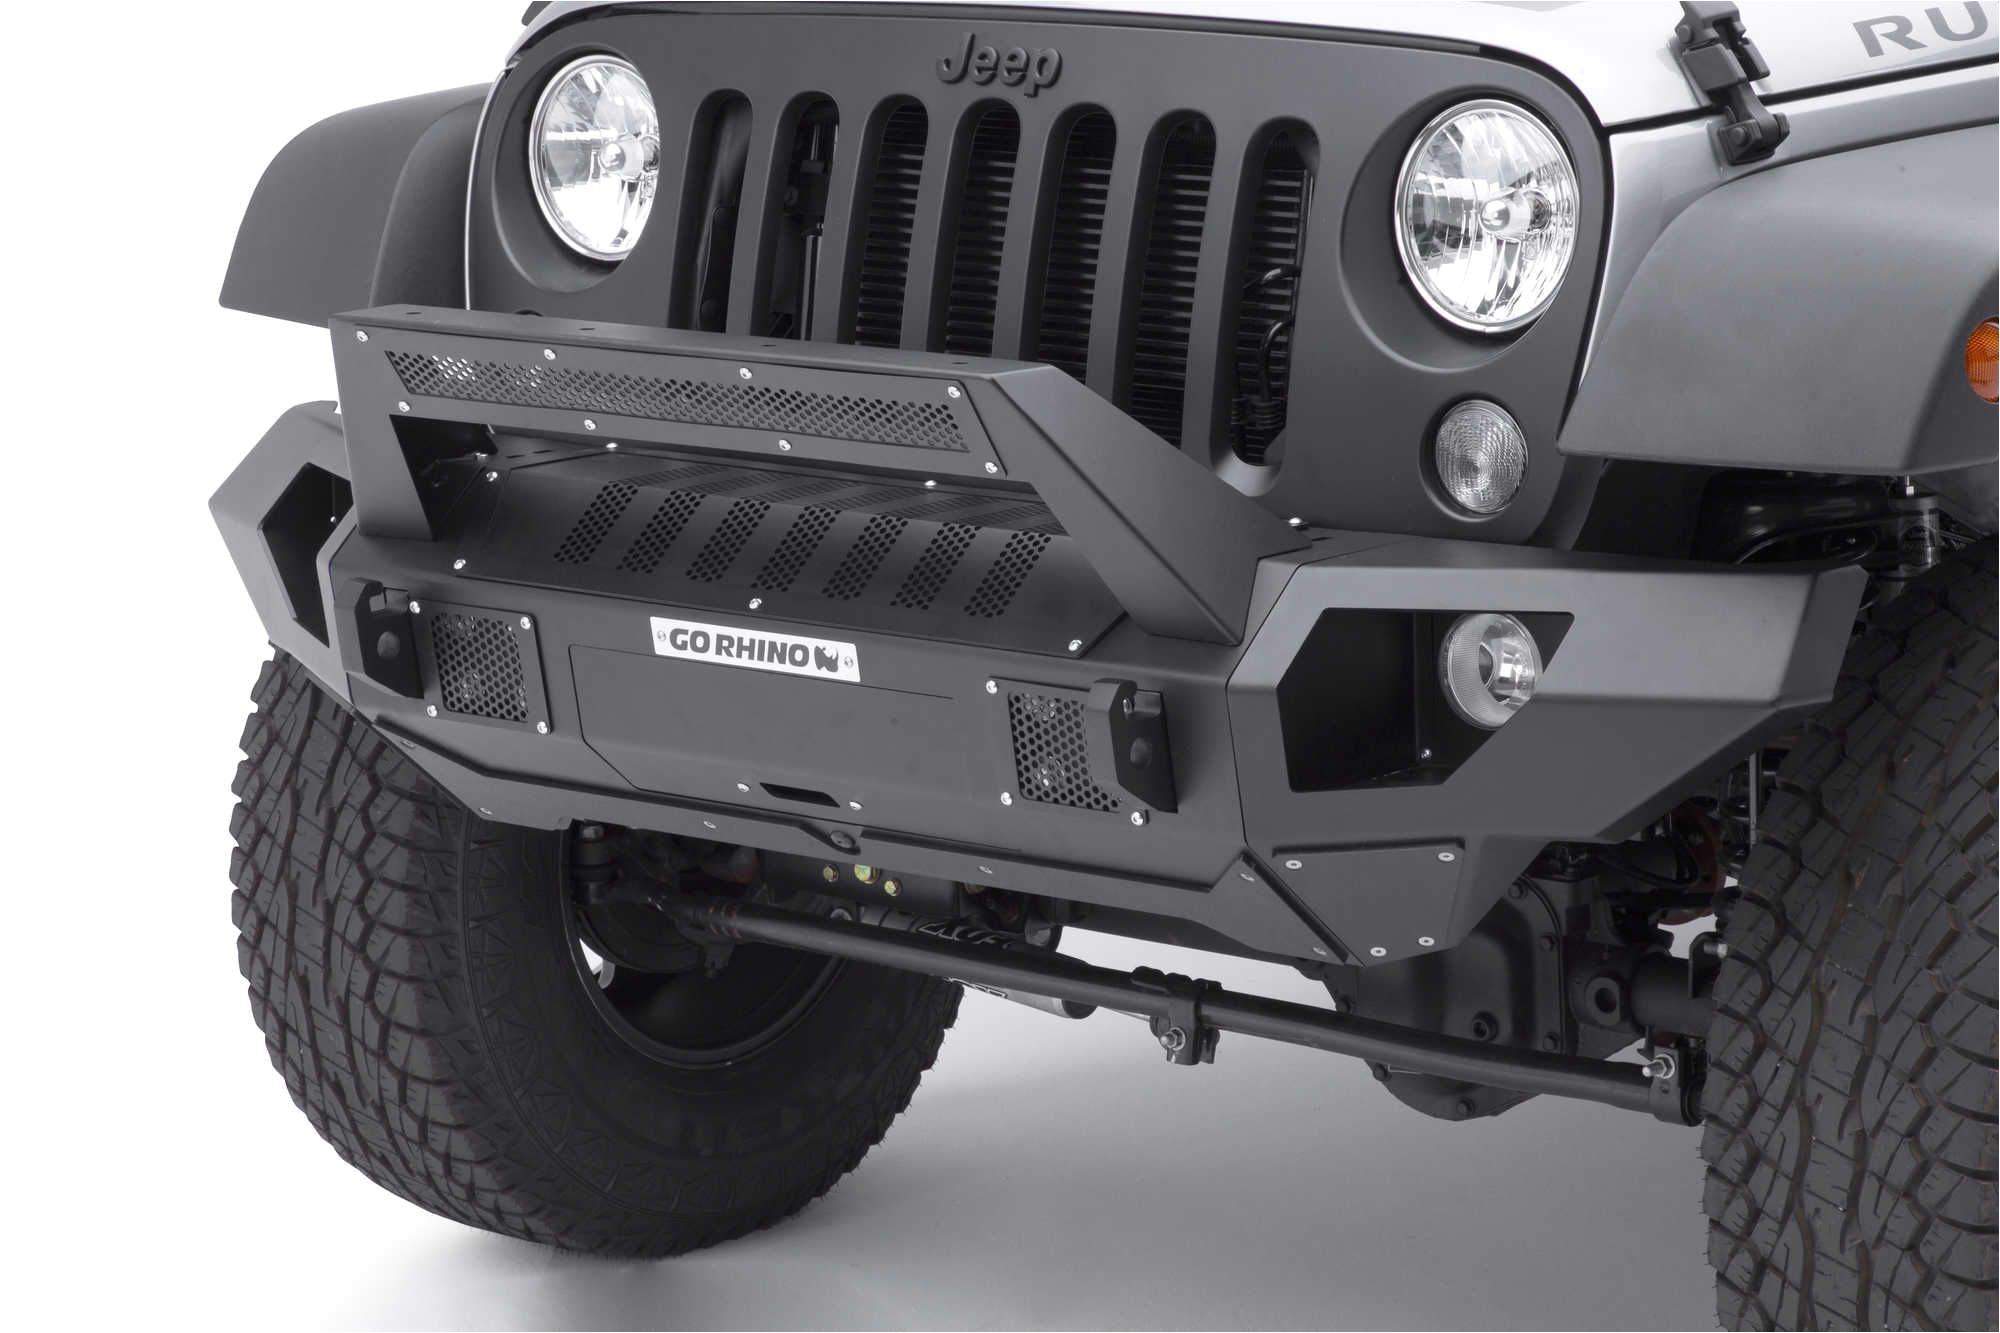 go rhino front bumper with straight end caps and roadline light mount bar for 07 17 jeepa wrangler and wrangler unlimited jk quadratec